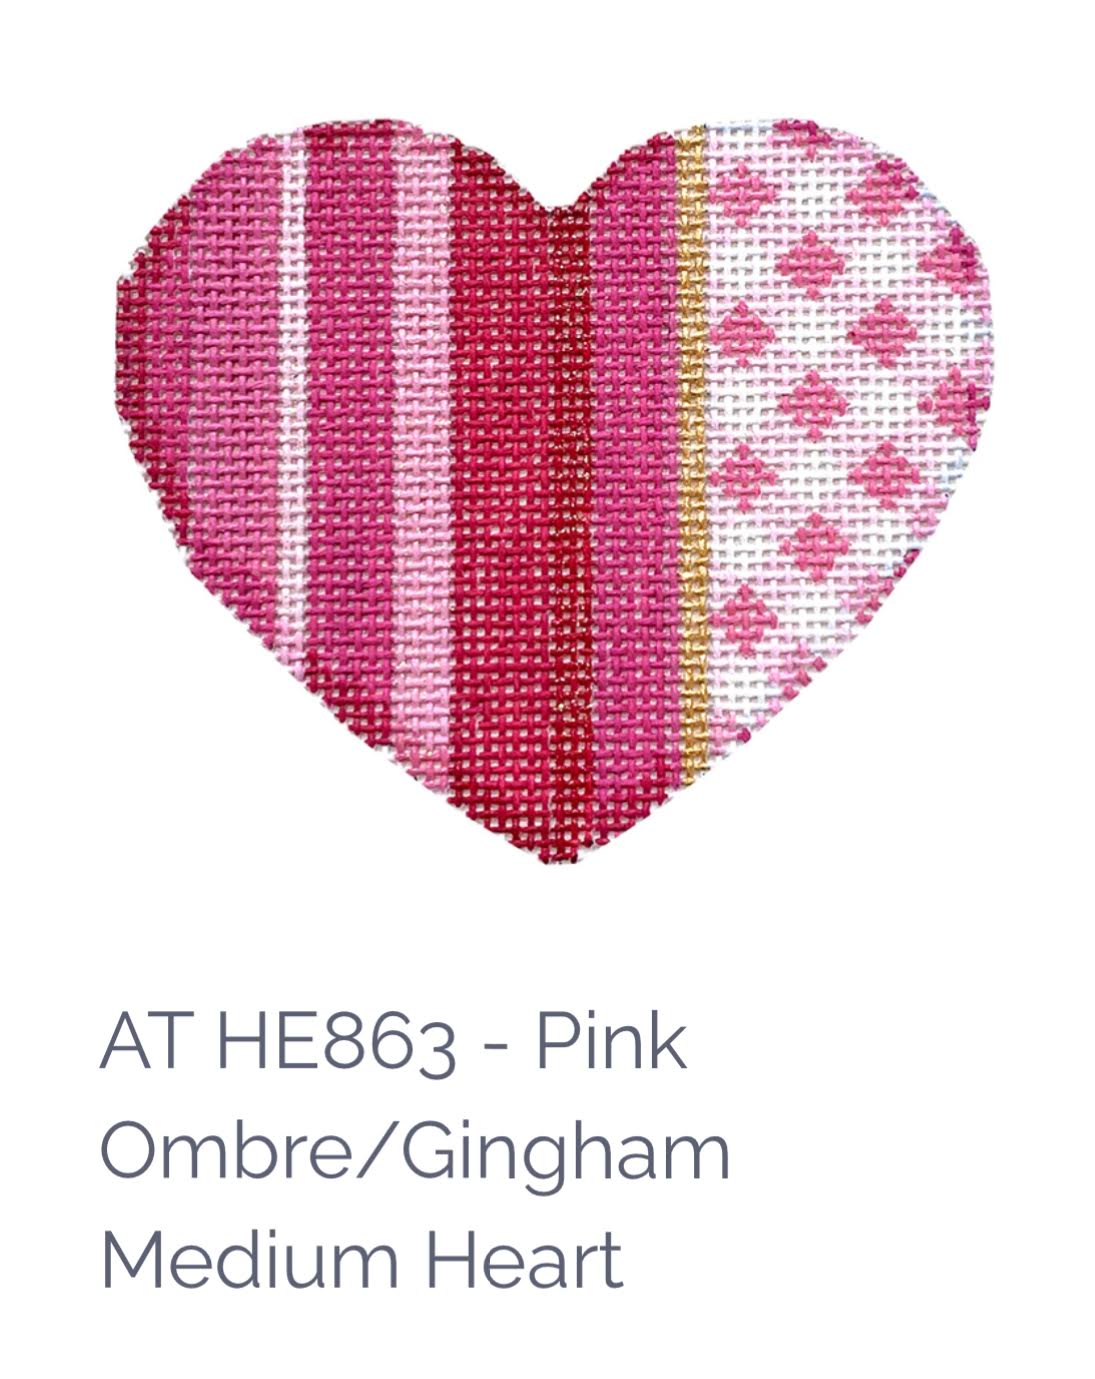 Associated Talents AT HE863 - Pink Ombre/Gingham Medium Heart